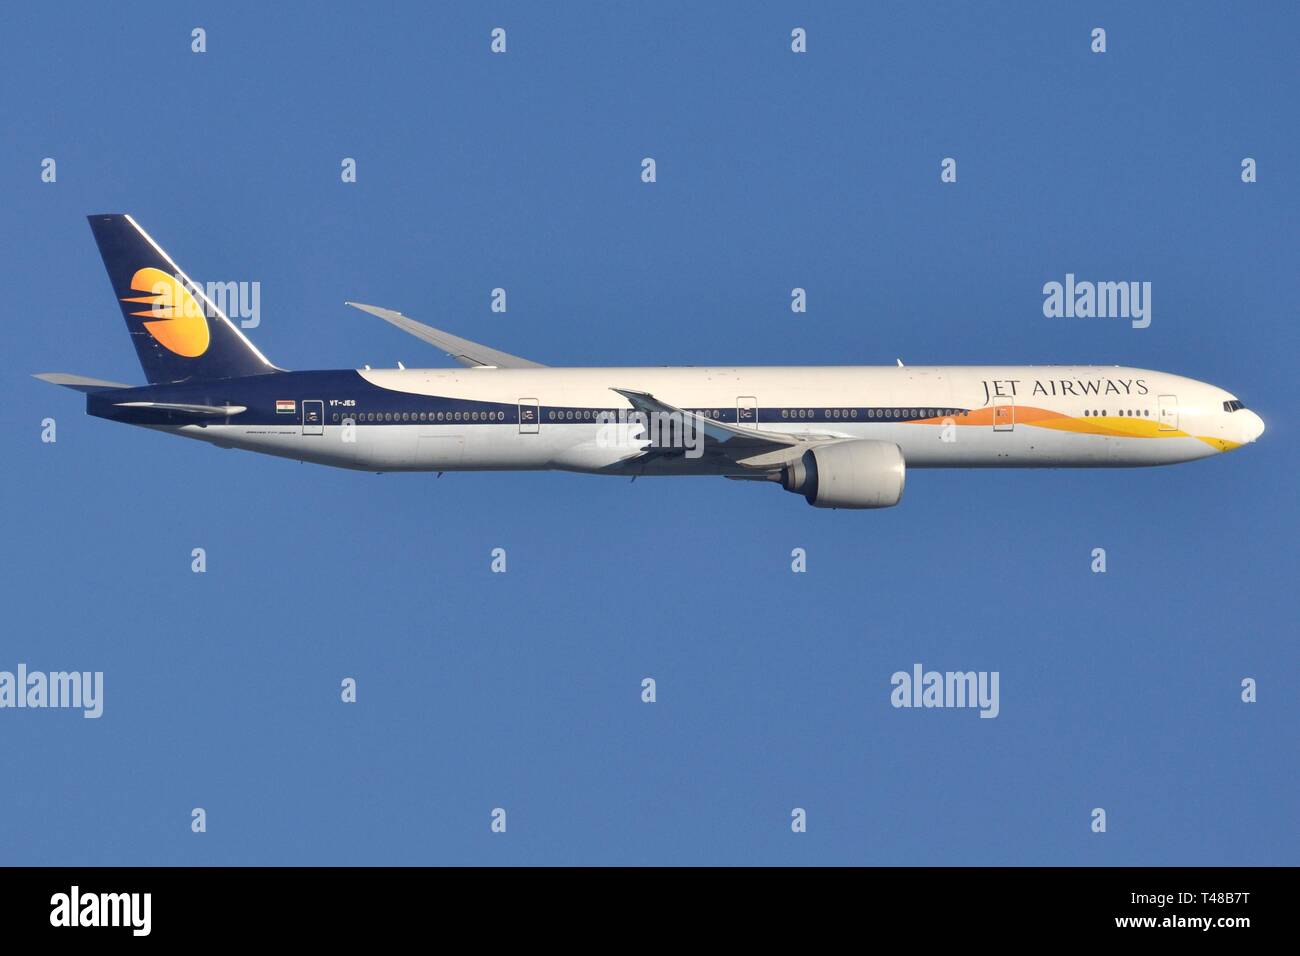 BOEING 777-300ER AIRCRAFT OF INDIA'S JET AIRWAYS Stock Photo